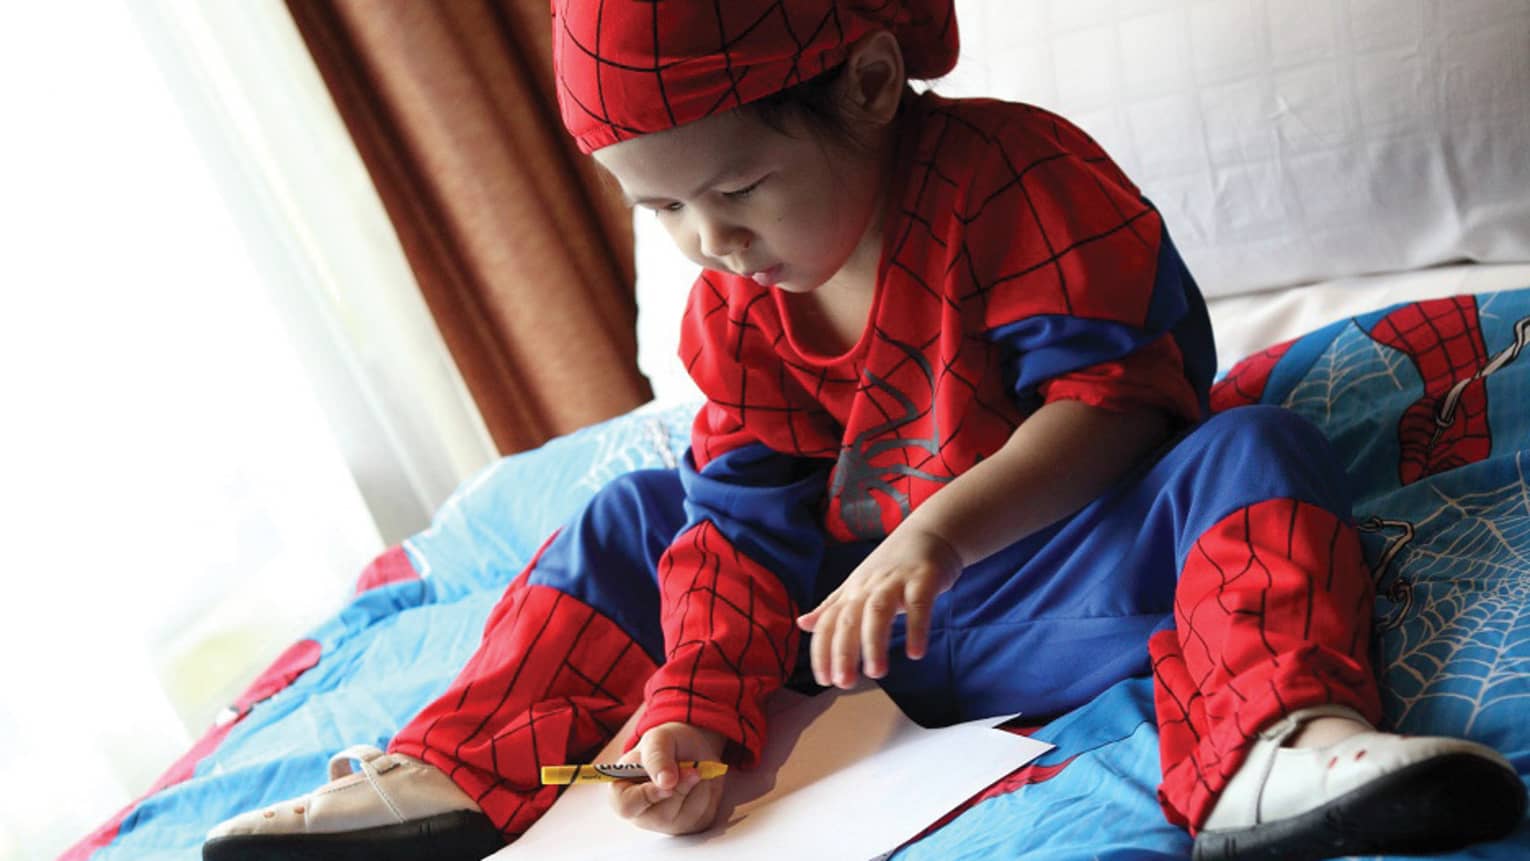 Young child wearing Spiderman costume sits on bed, colours in book